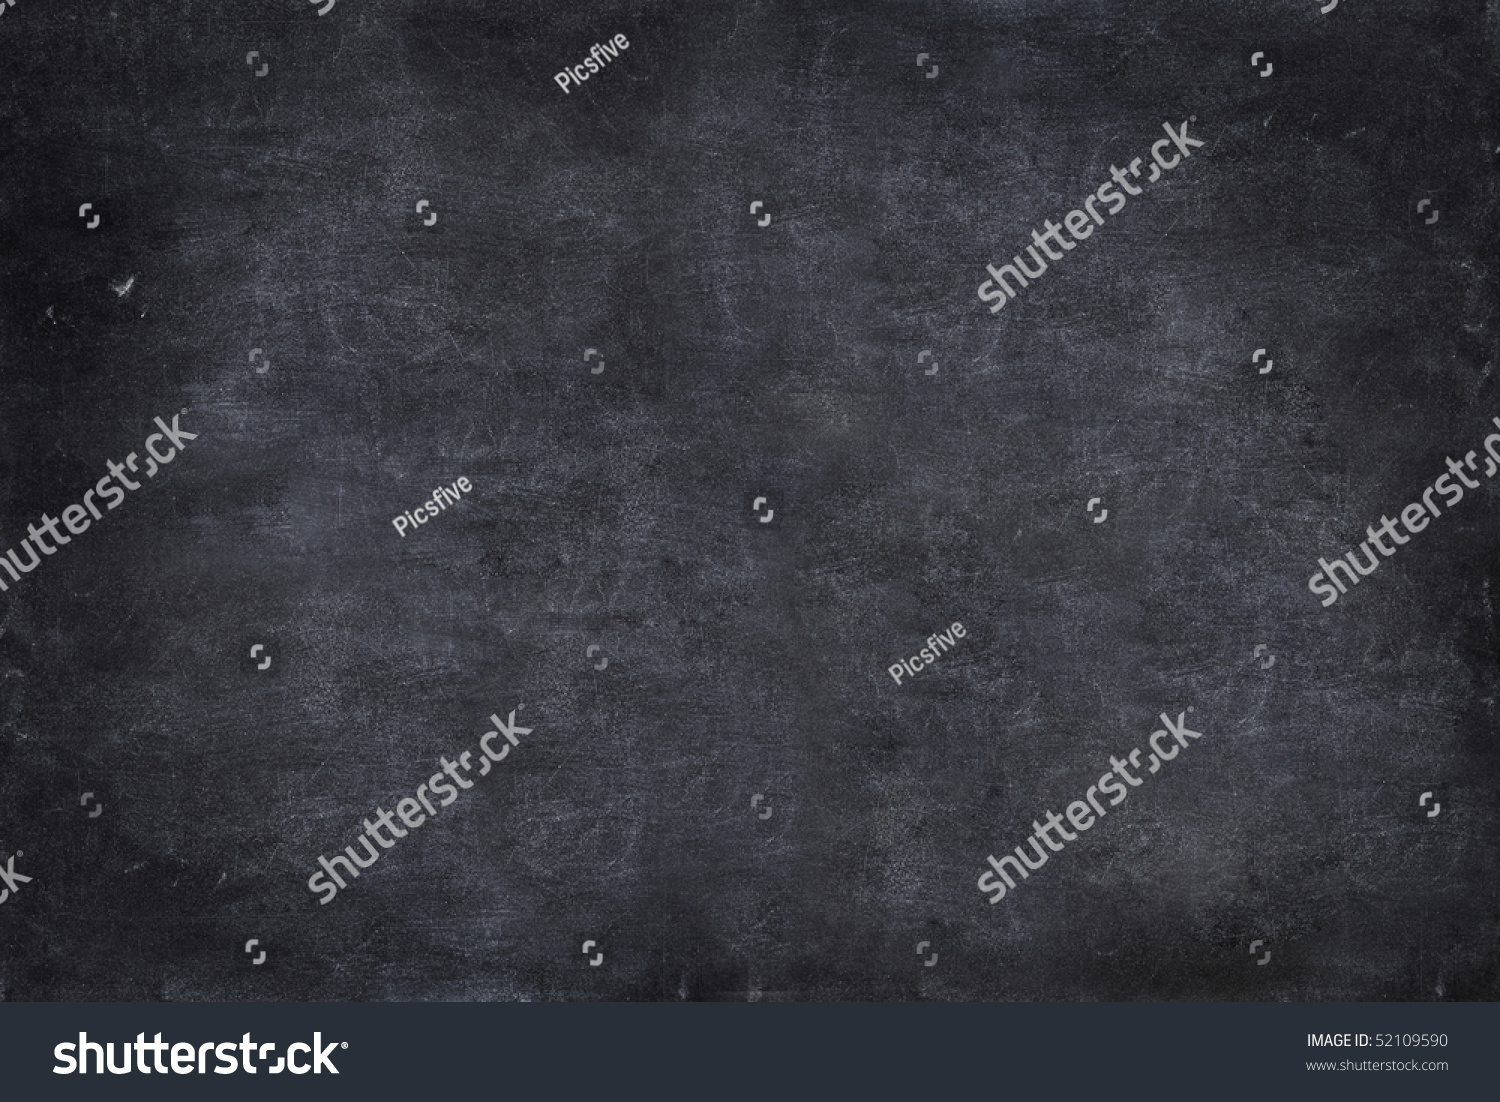 close up of a black dirty chalkboard #52109590